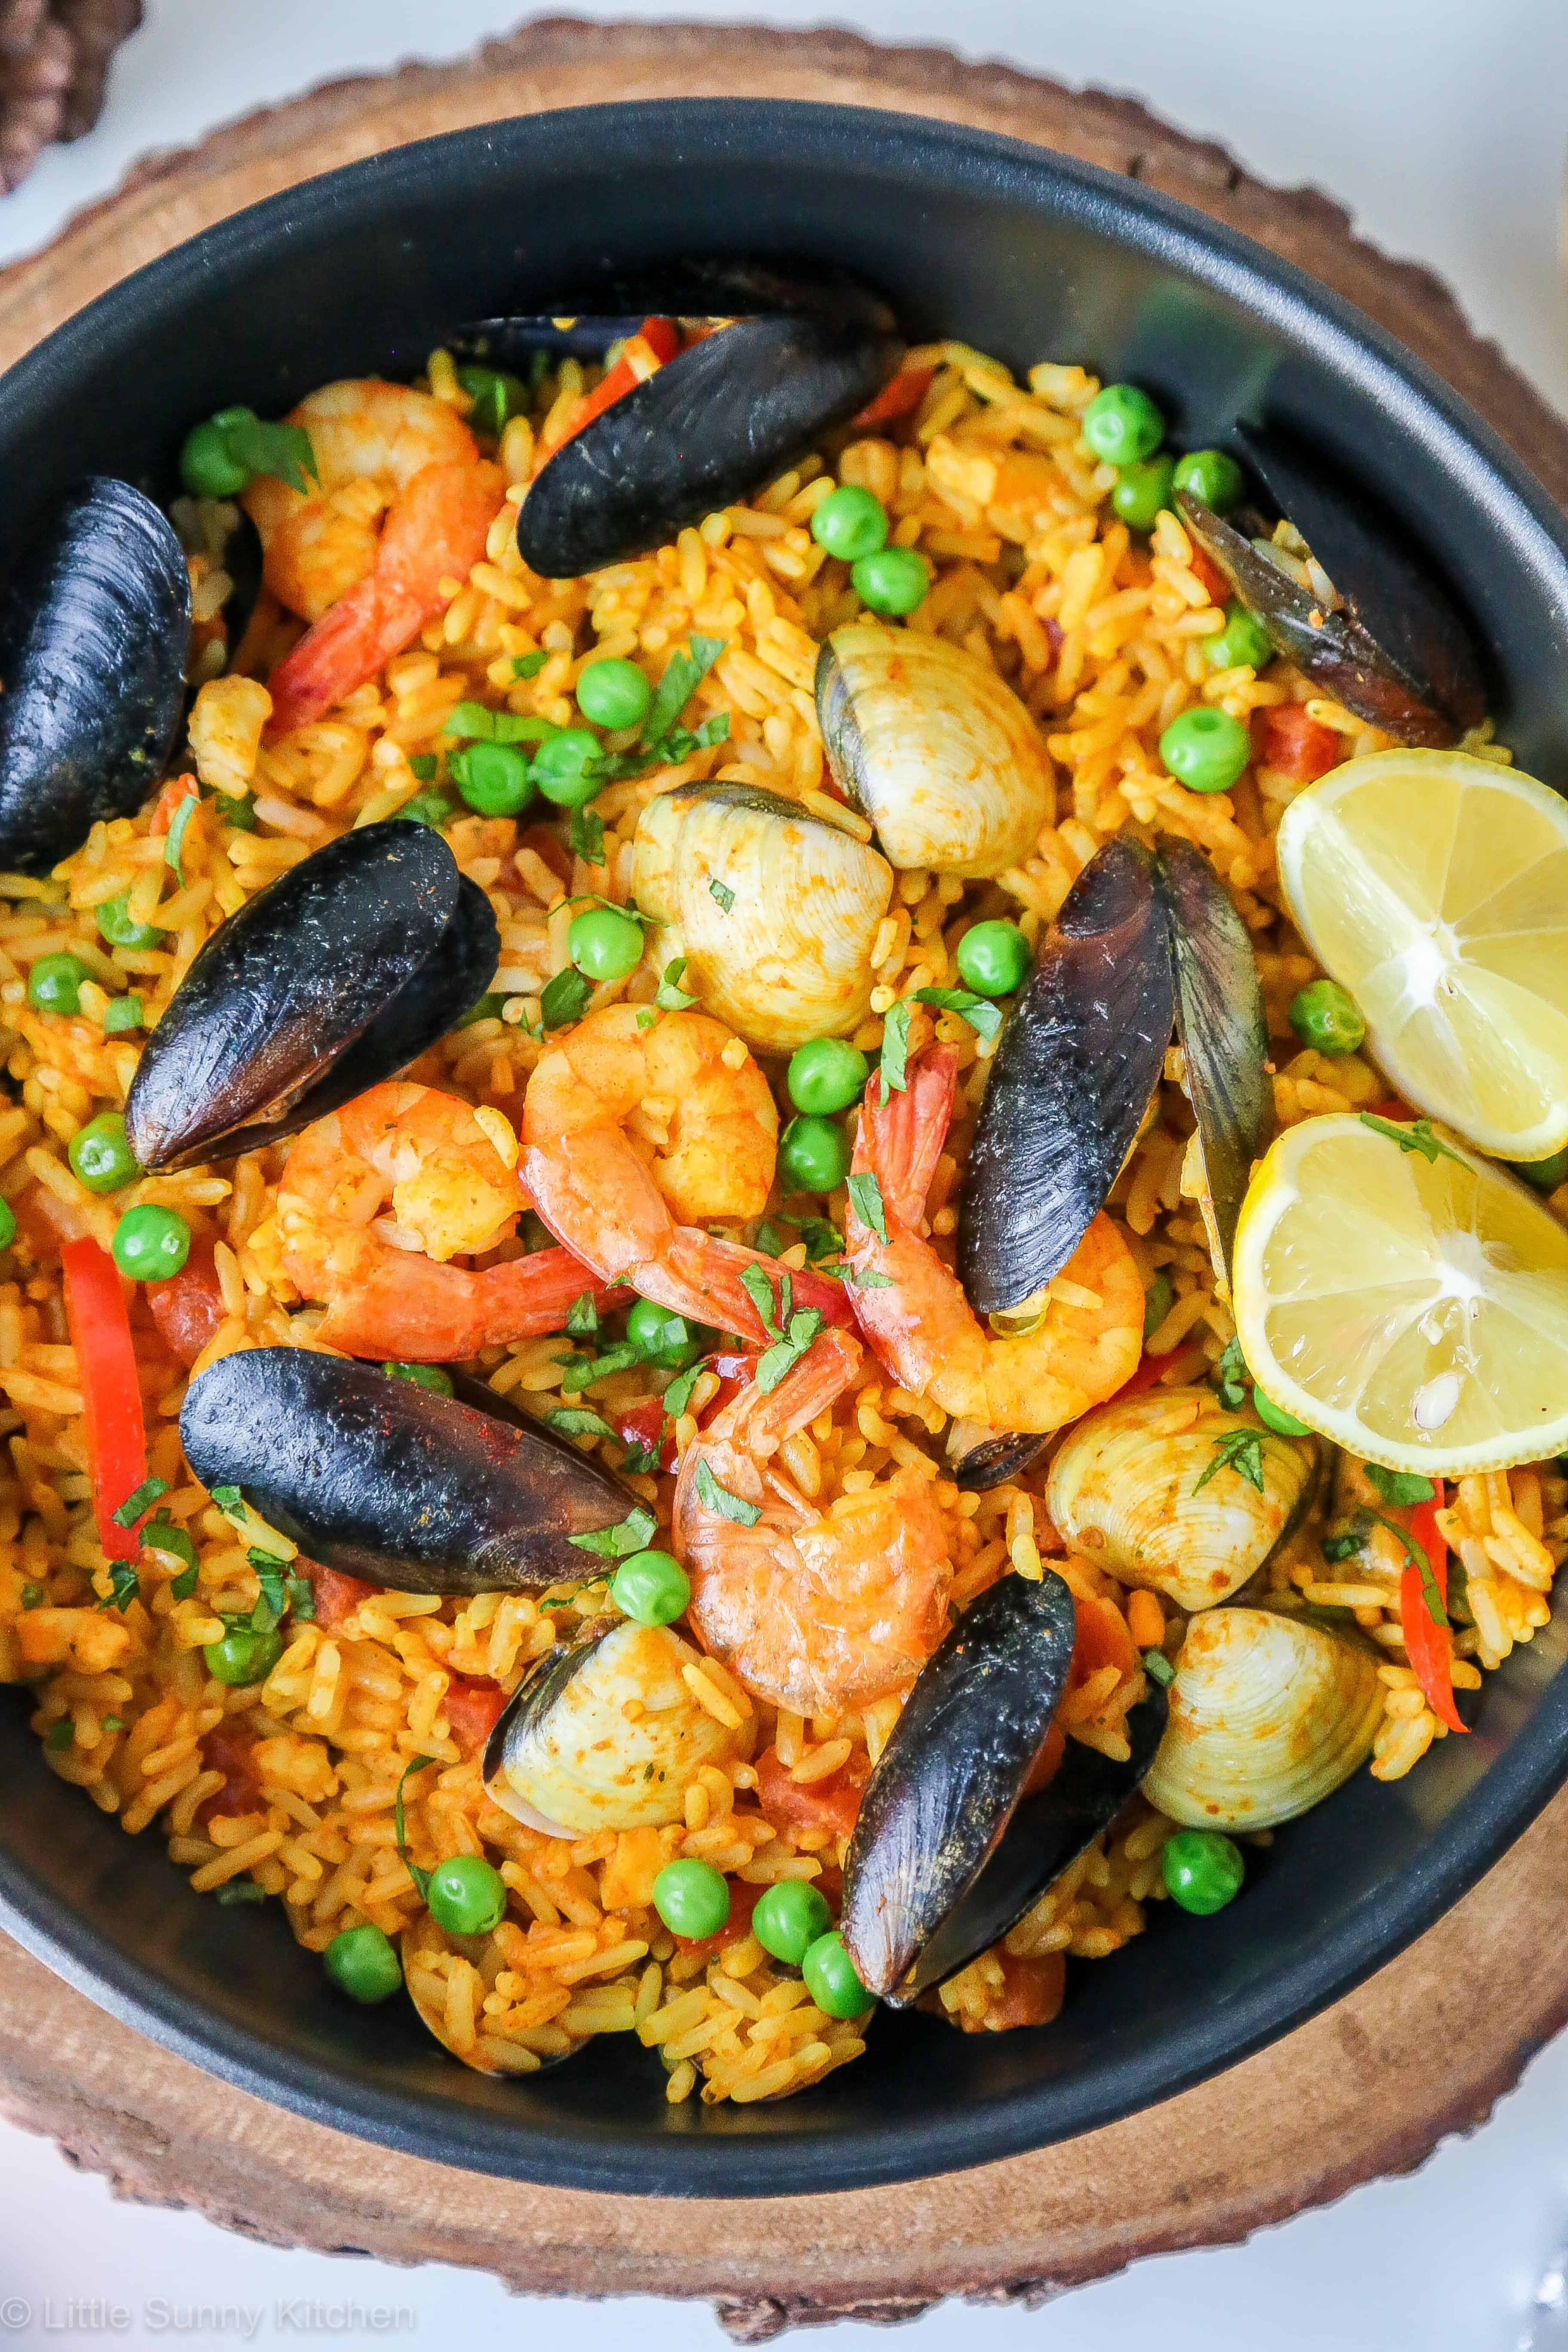 A colourful Spanish Seafood paella. Ready in under 20 minutes!